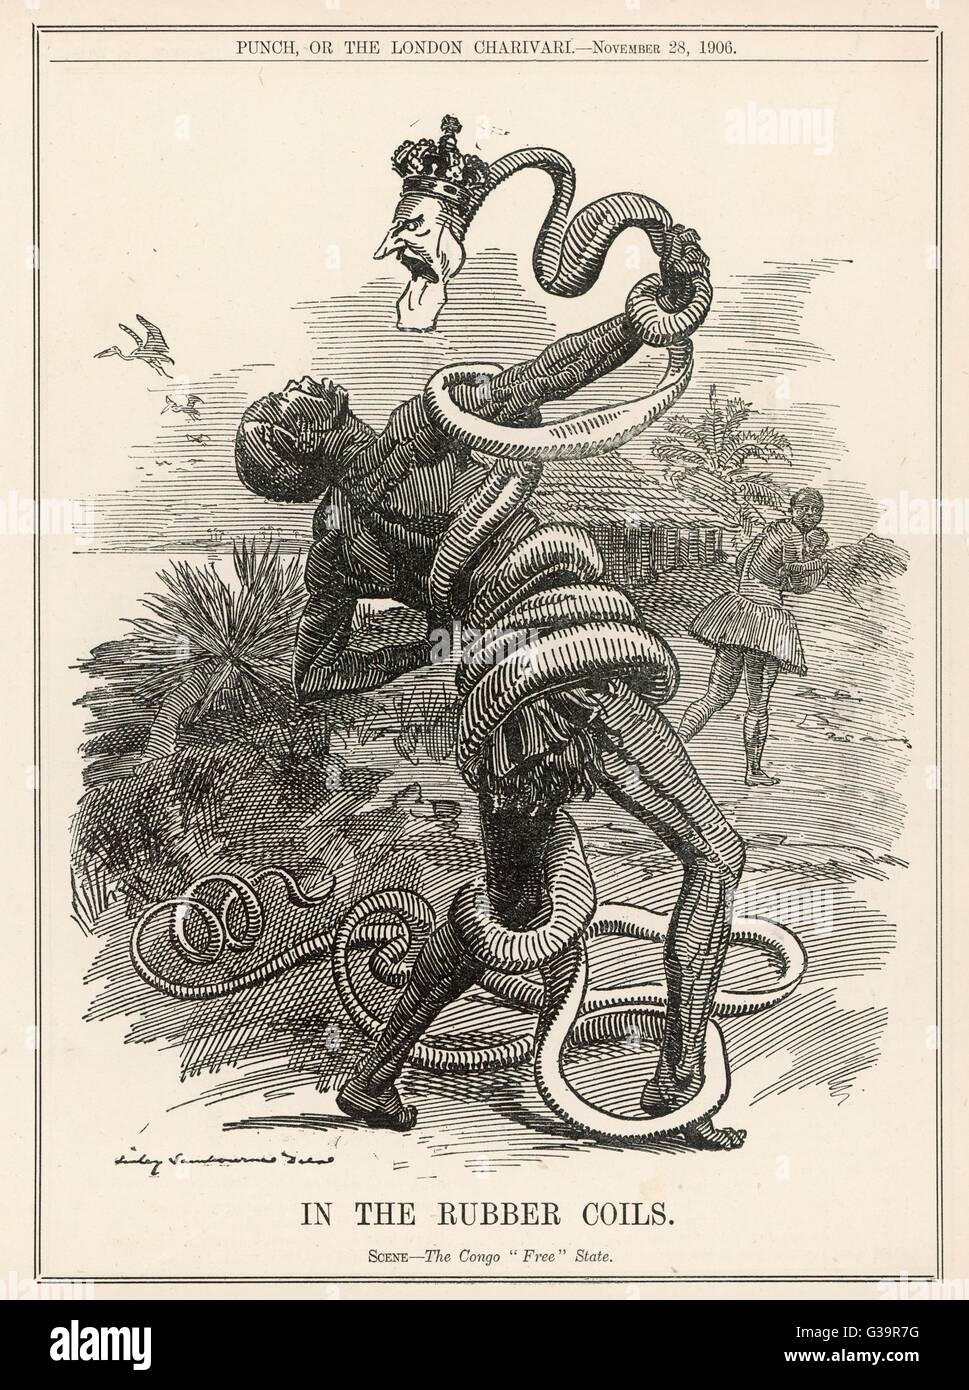 King Leopold II, King of the Belgians, crushes the Belgian Congo, 'in the rubber coils'  a reference to Leopold's exploitation of the Congo Free State, extorting forced labour from the native people to harvest rubber for trade.  1906 Stock Photo